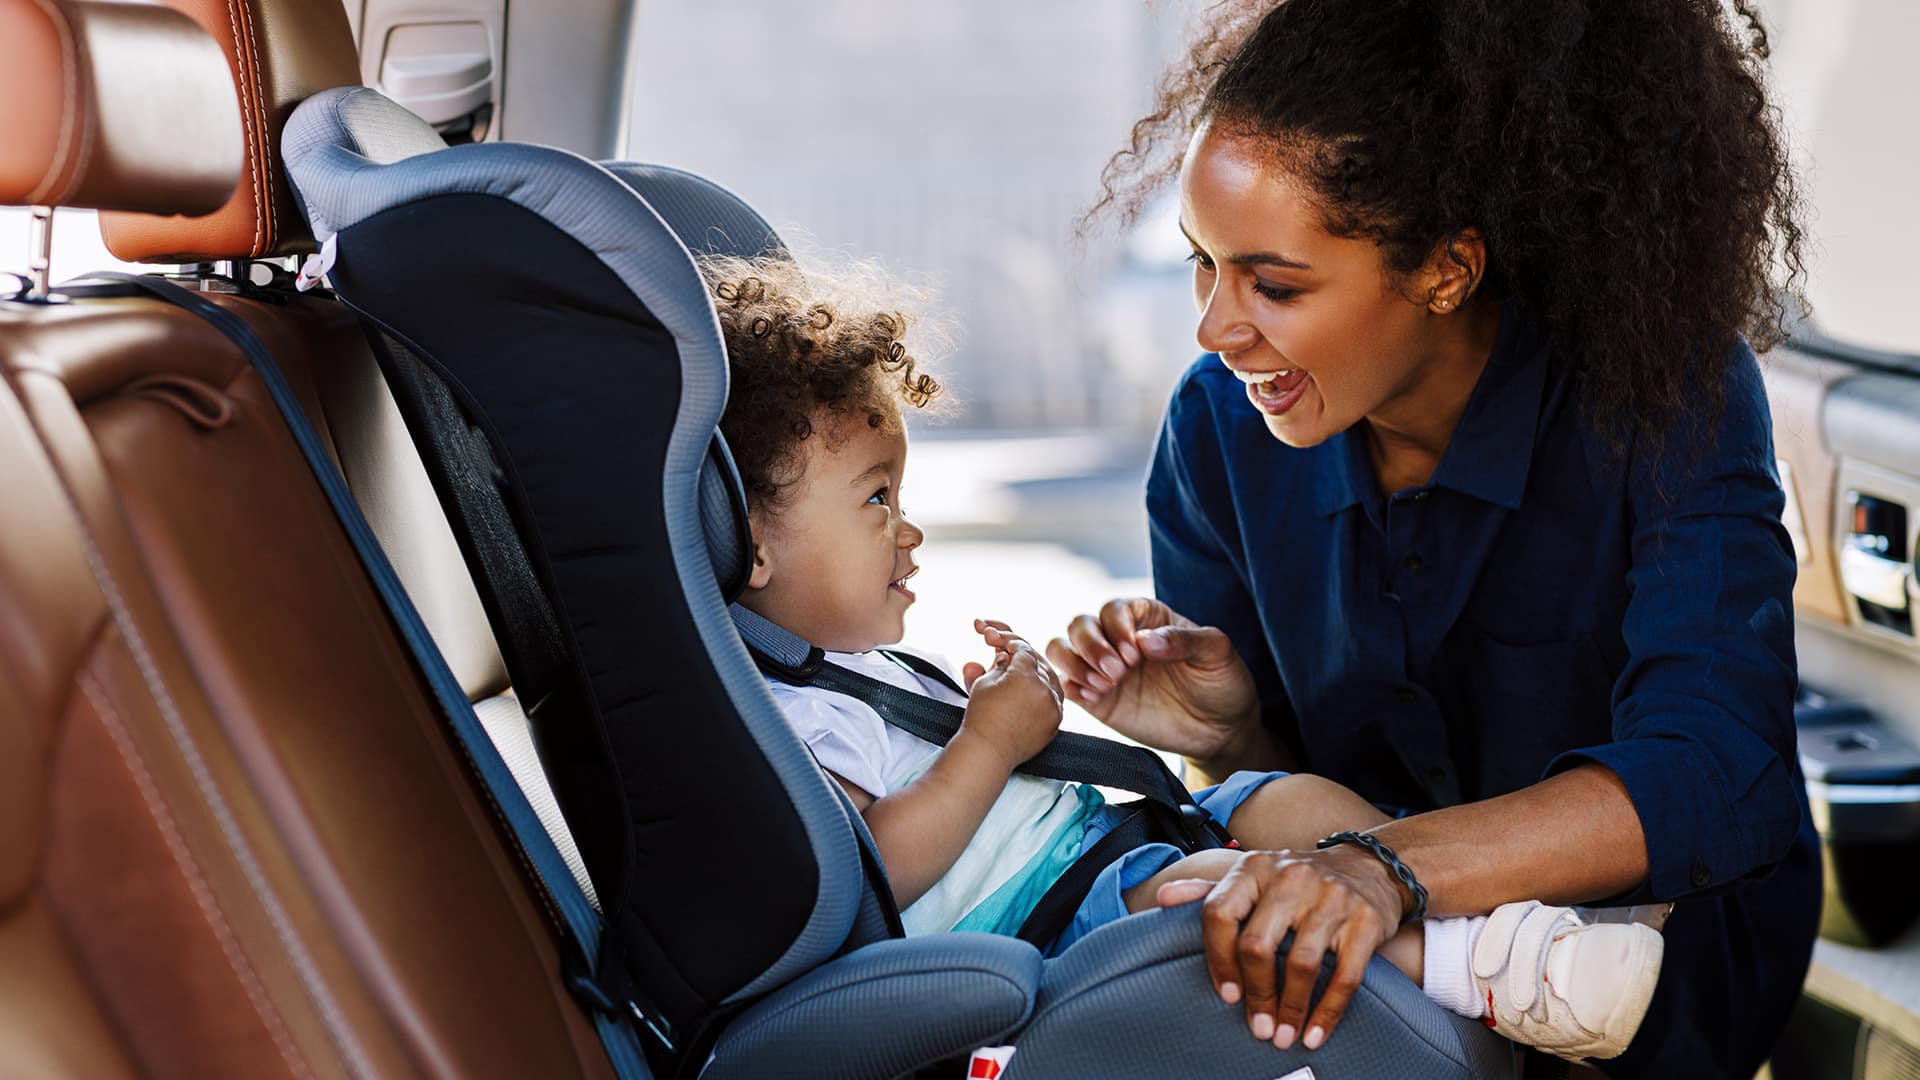 Smiling mother buckling baby into a booster car seat.